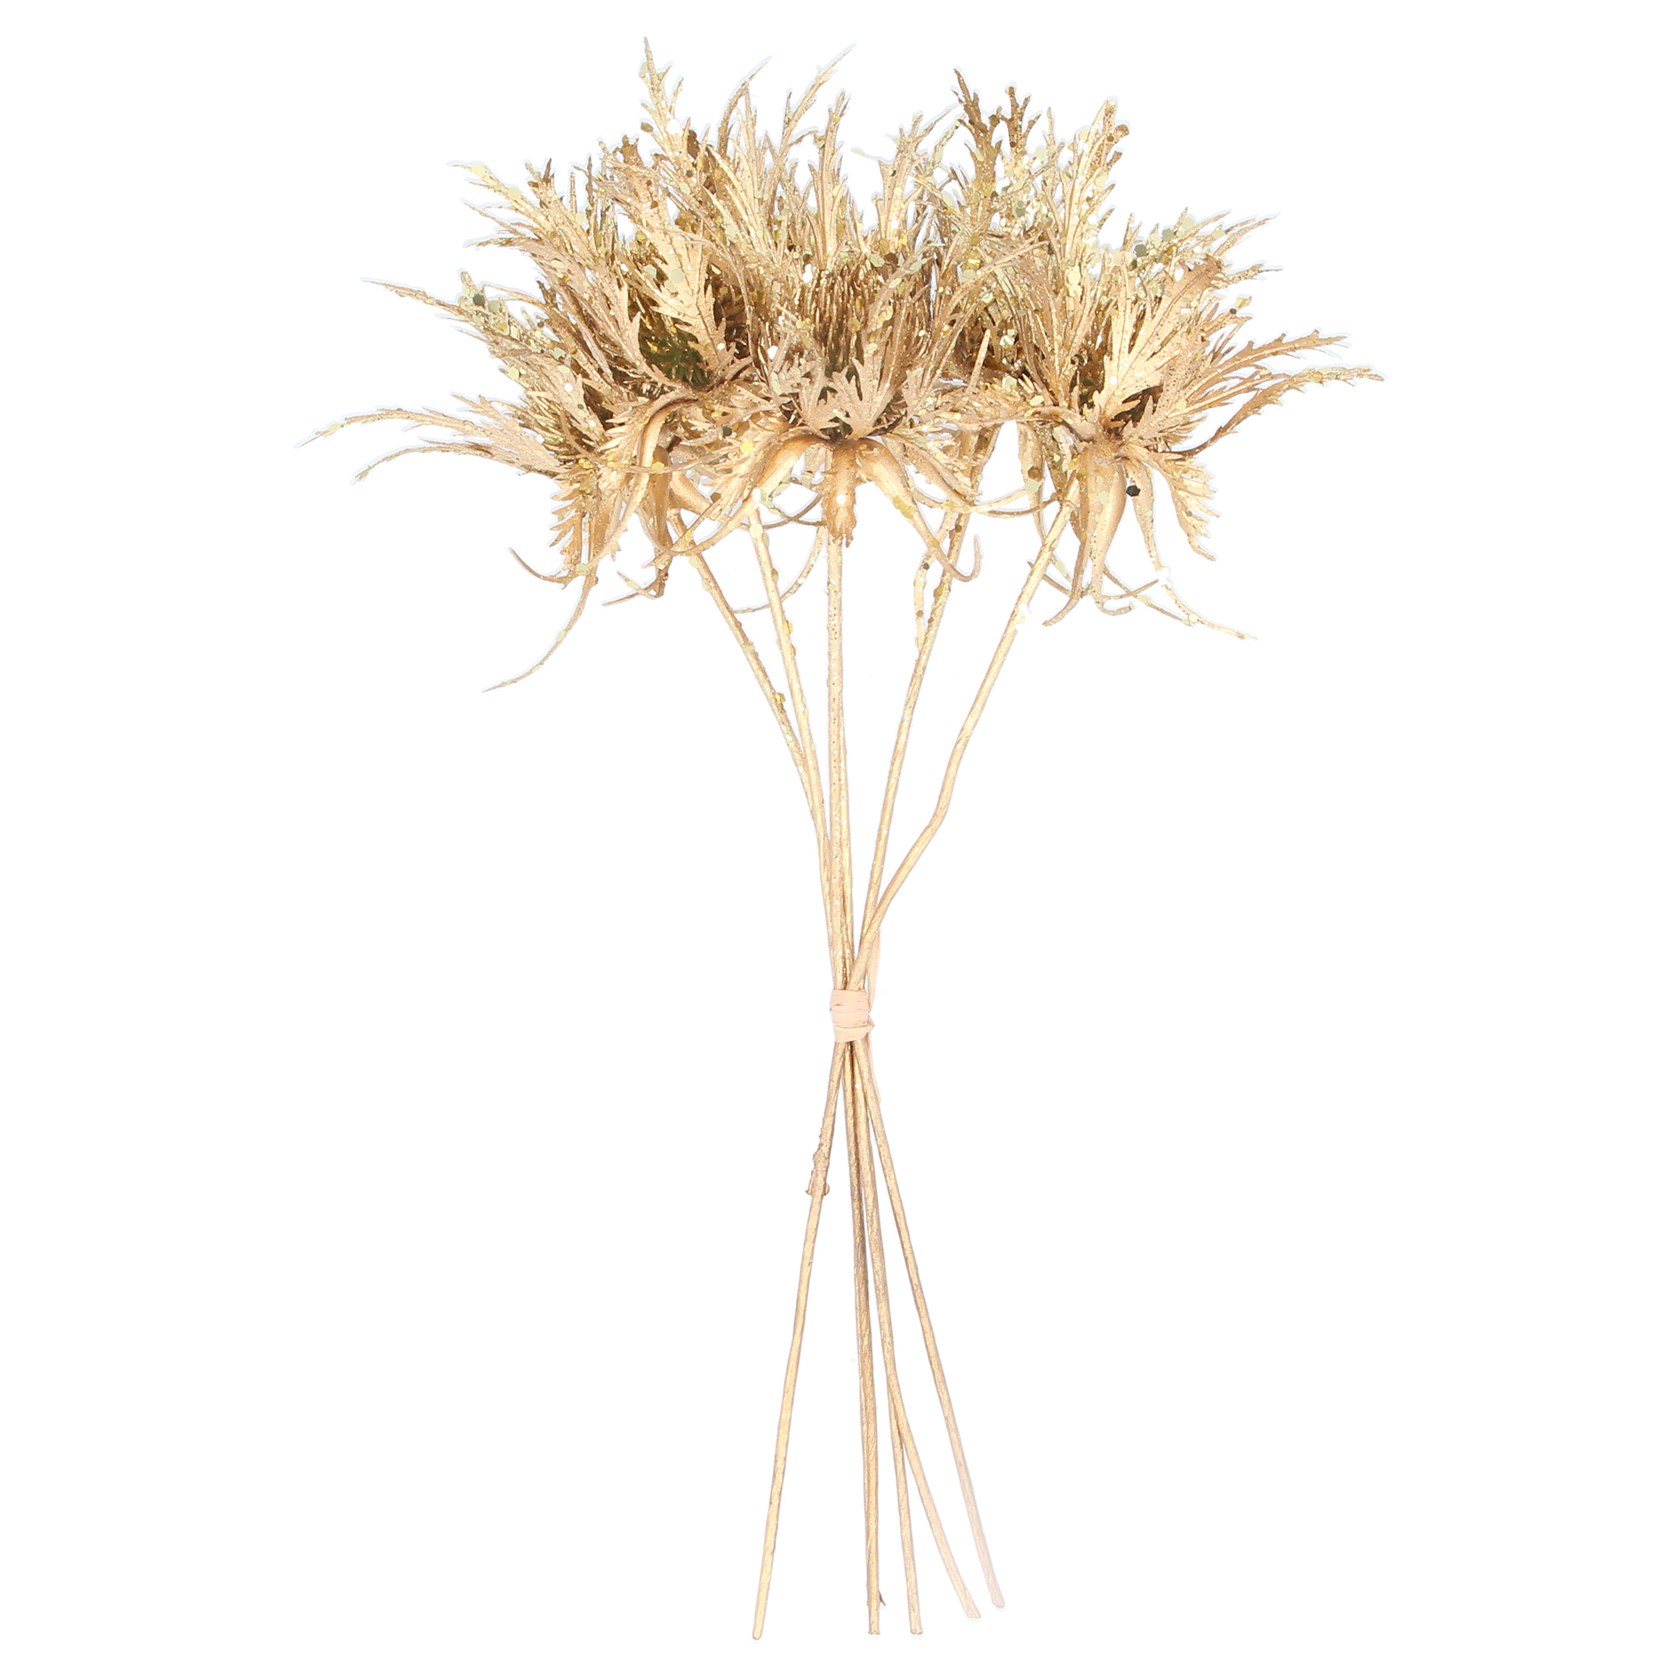 Gold thistle bunch Christmas decoration. By Gisela Graham. The perfect festive addition to your home.